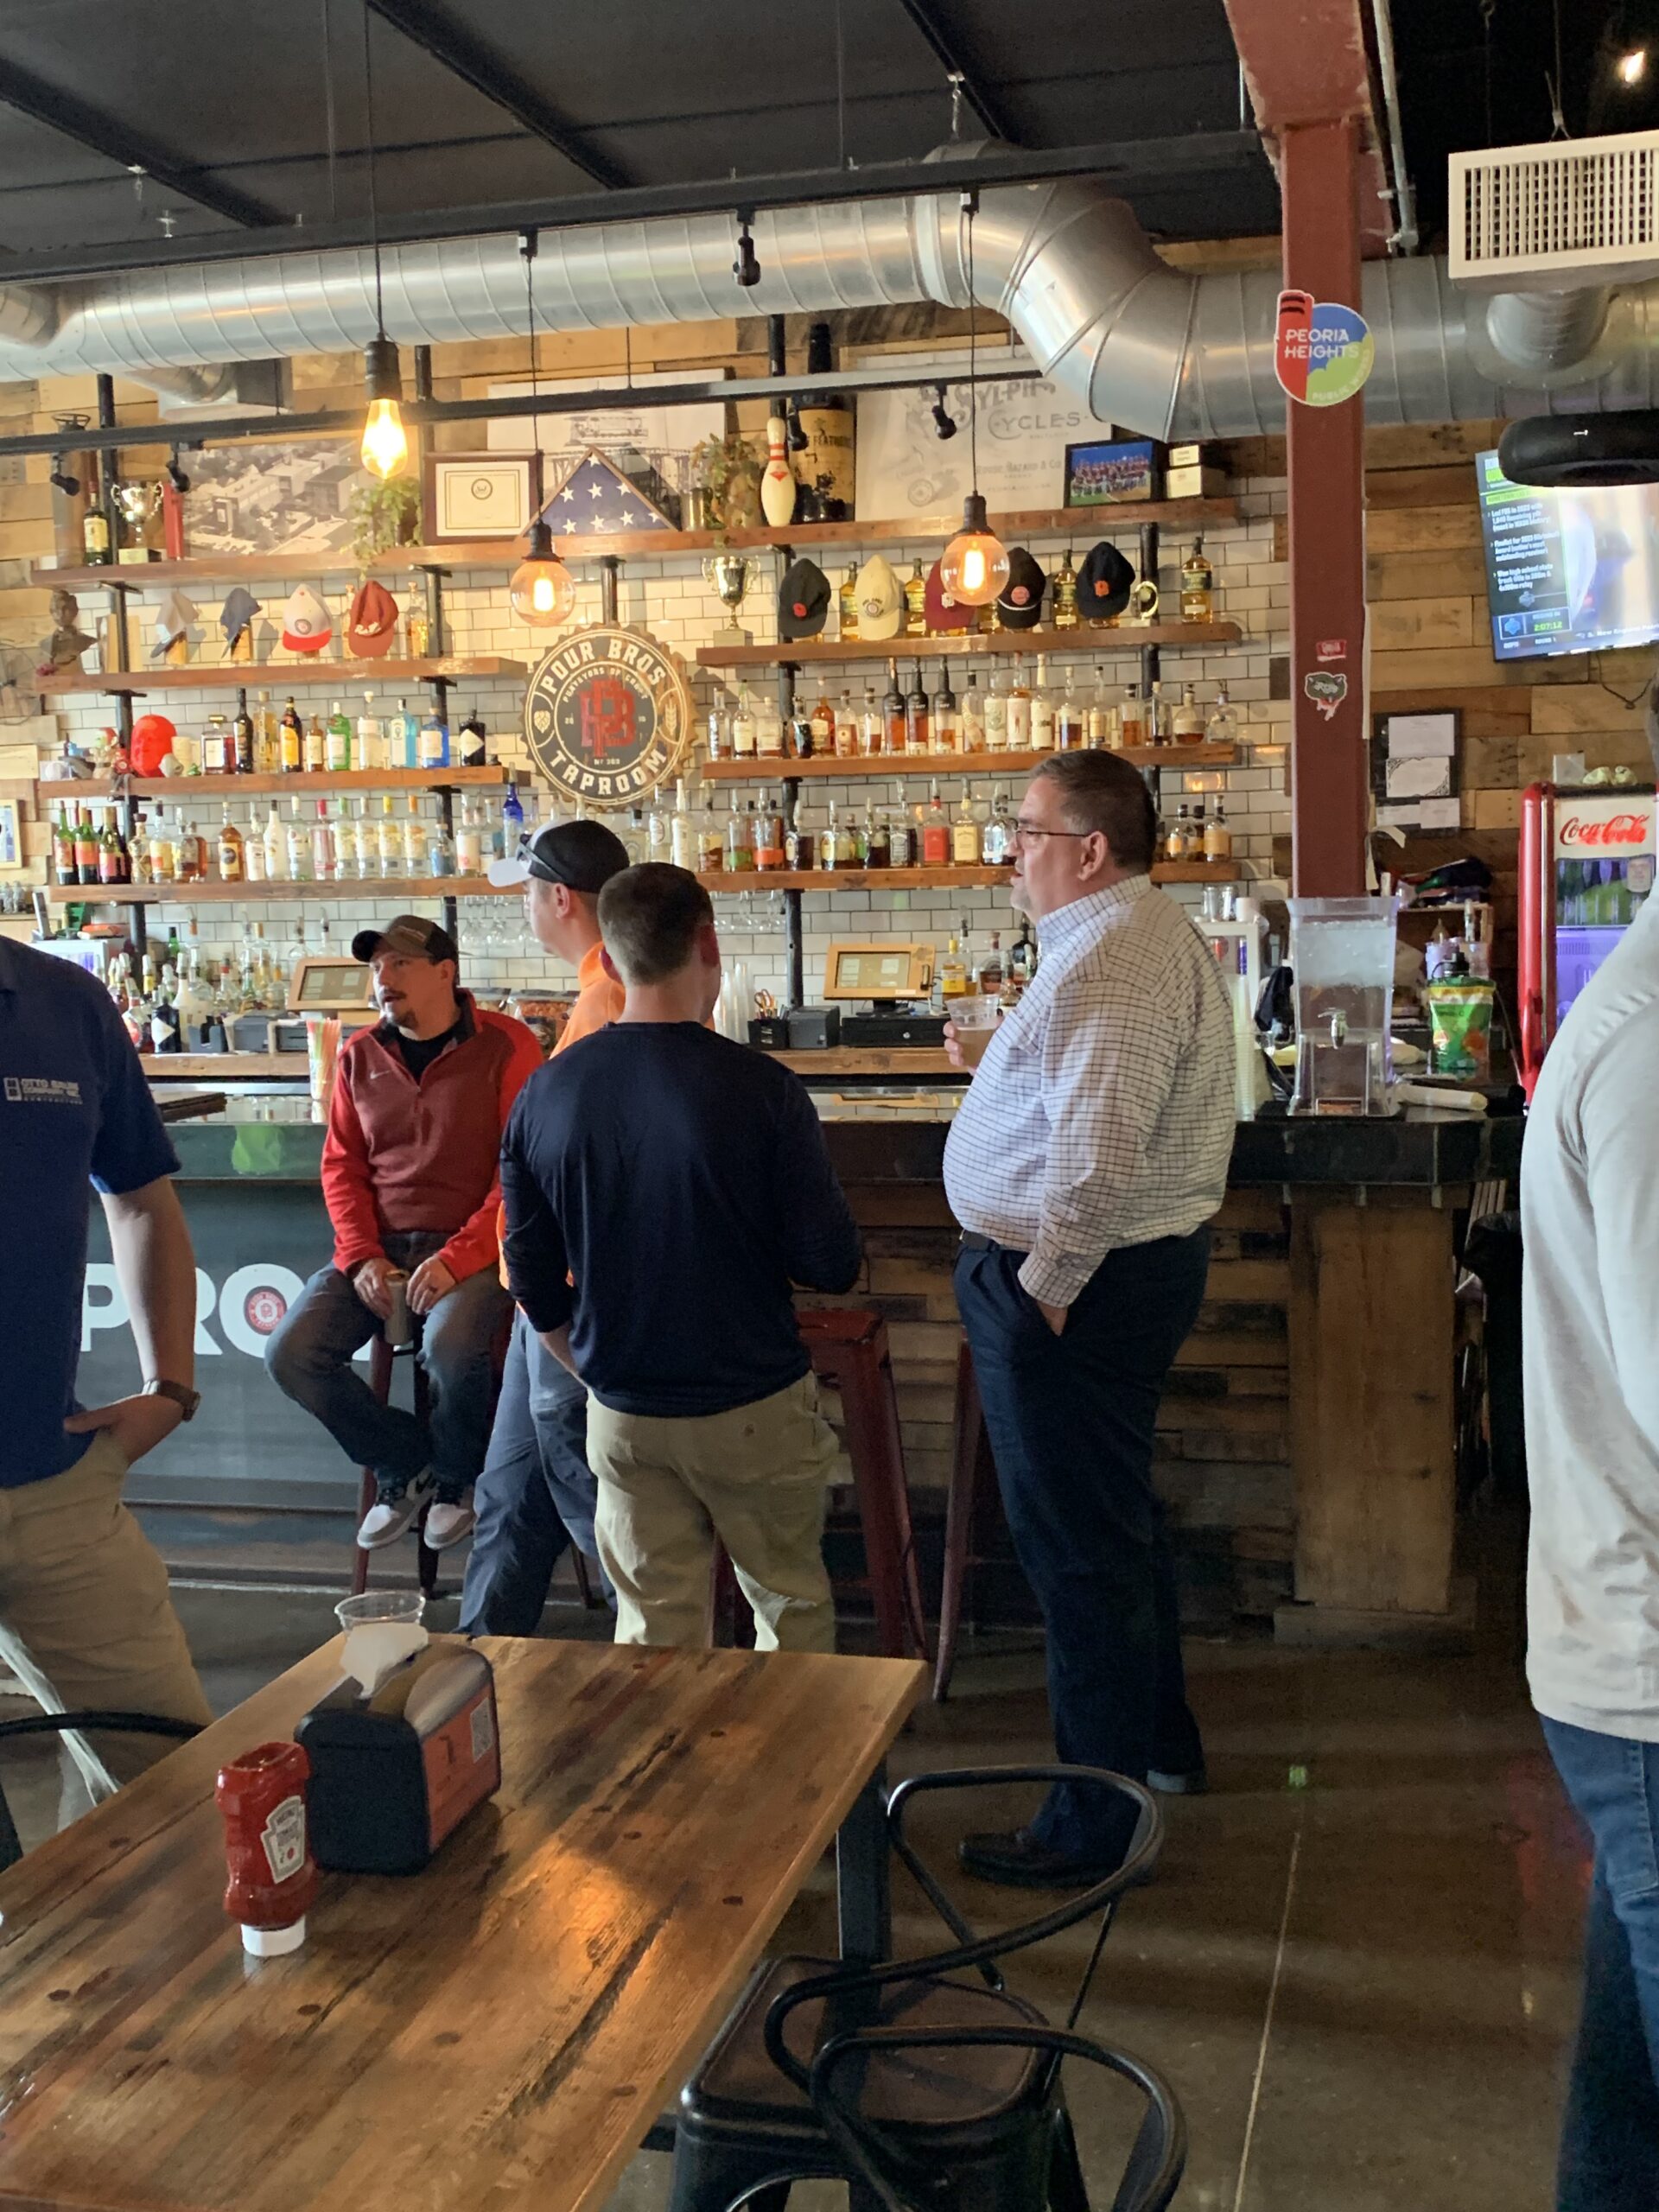 A group of people standing around in a bar.